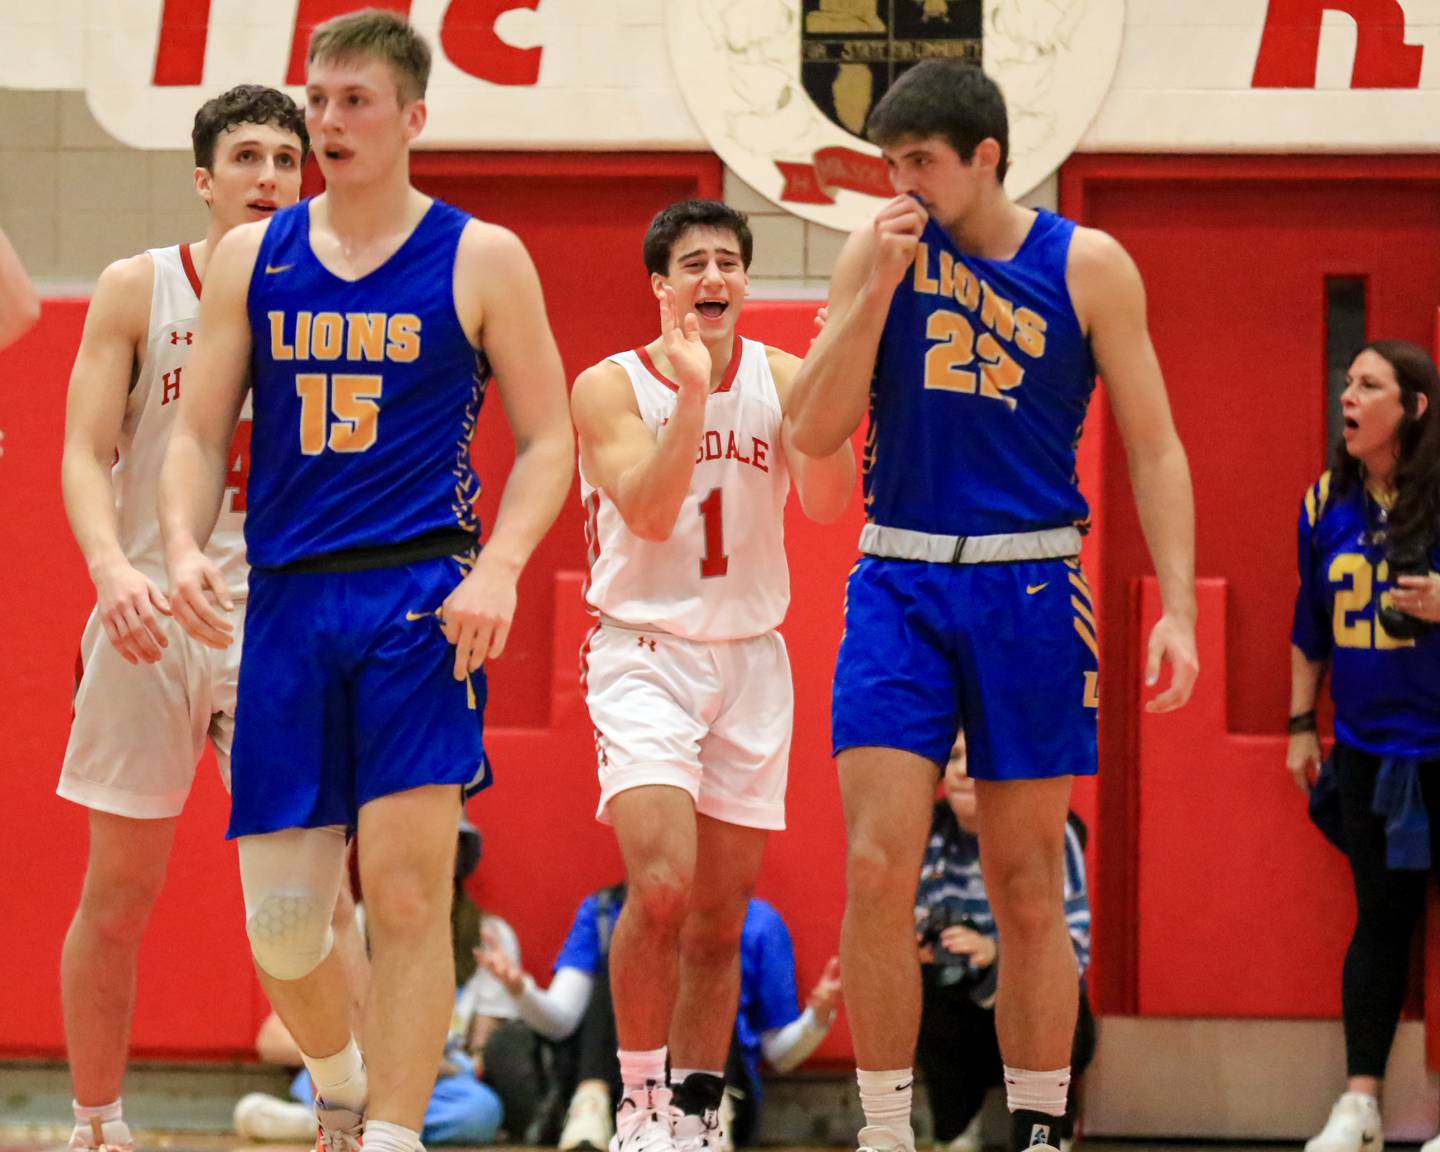 Hinsdale Central's Evan Phillips (1) celebrates a defensive stop during varsity basketball game between Lyons at Hinsdale Central.  Jan 20, 2023.